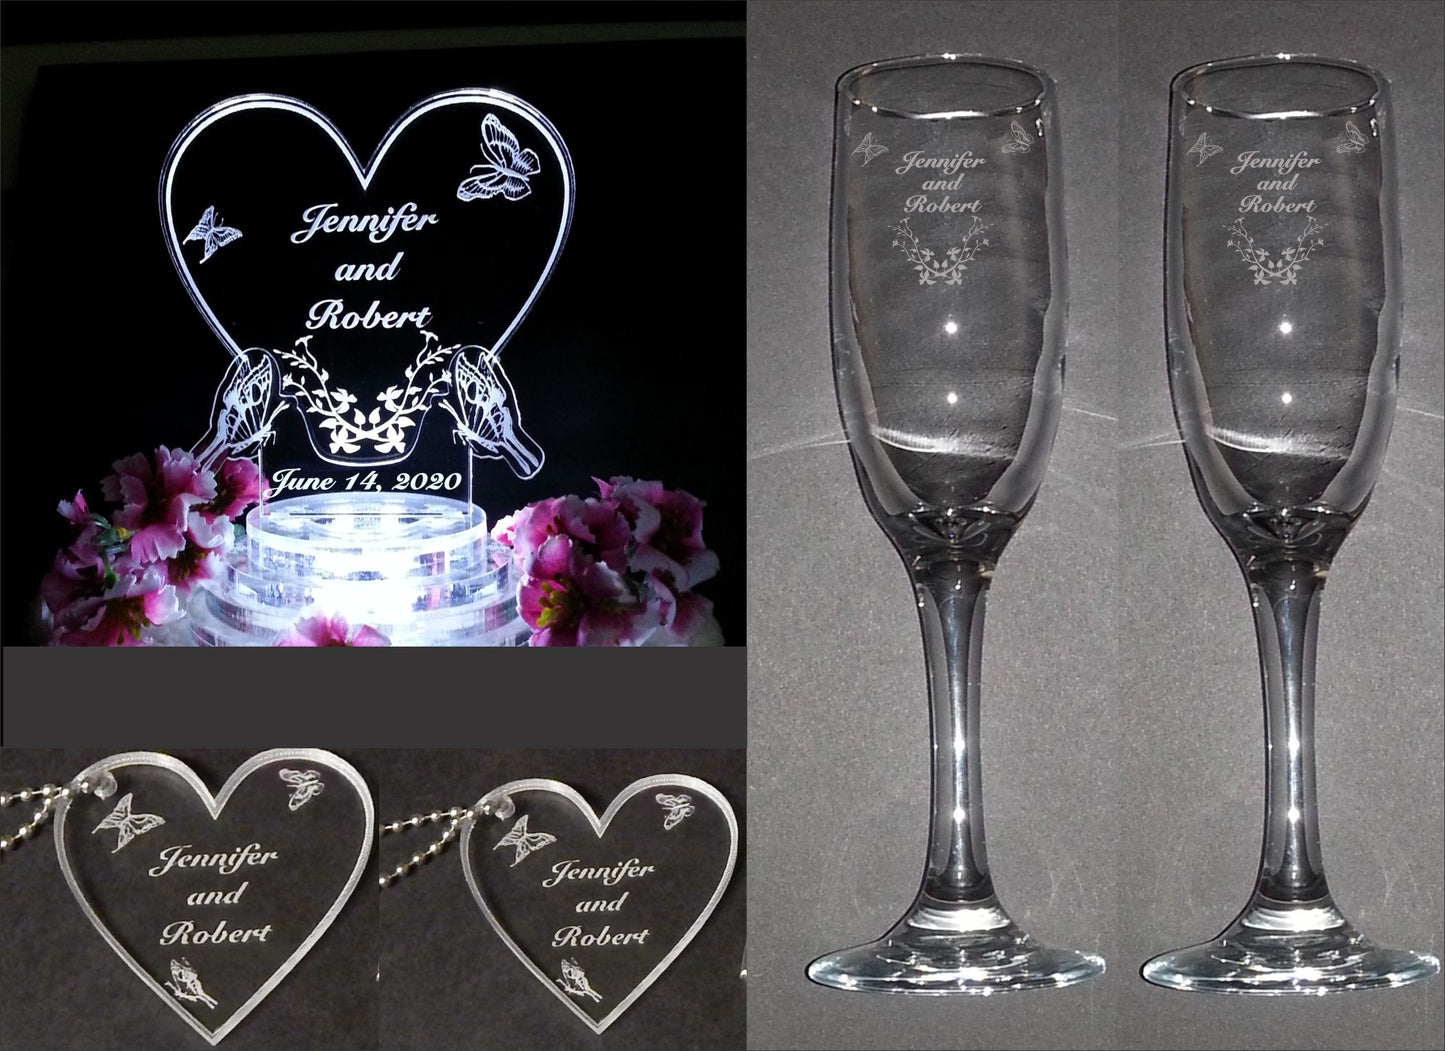 photo showing package items including heart shaped acrylic cake topper decorated with butterflies, 2 sizes of keychain favors, and a set of champagne flutes